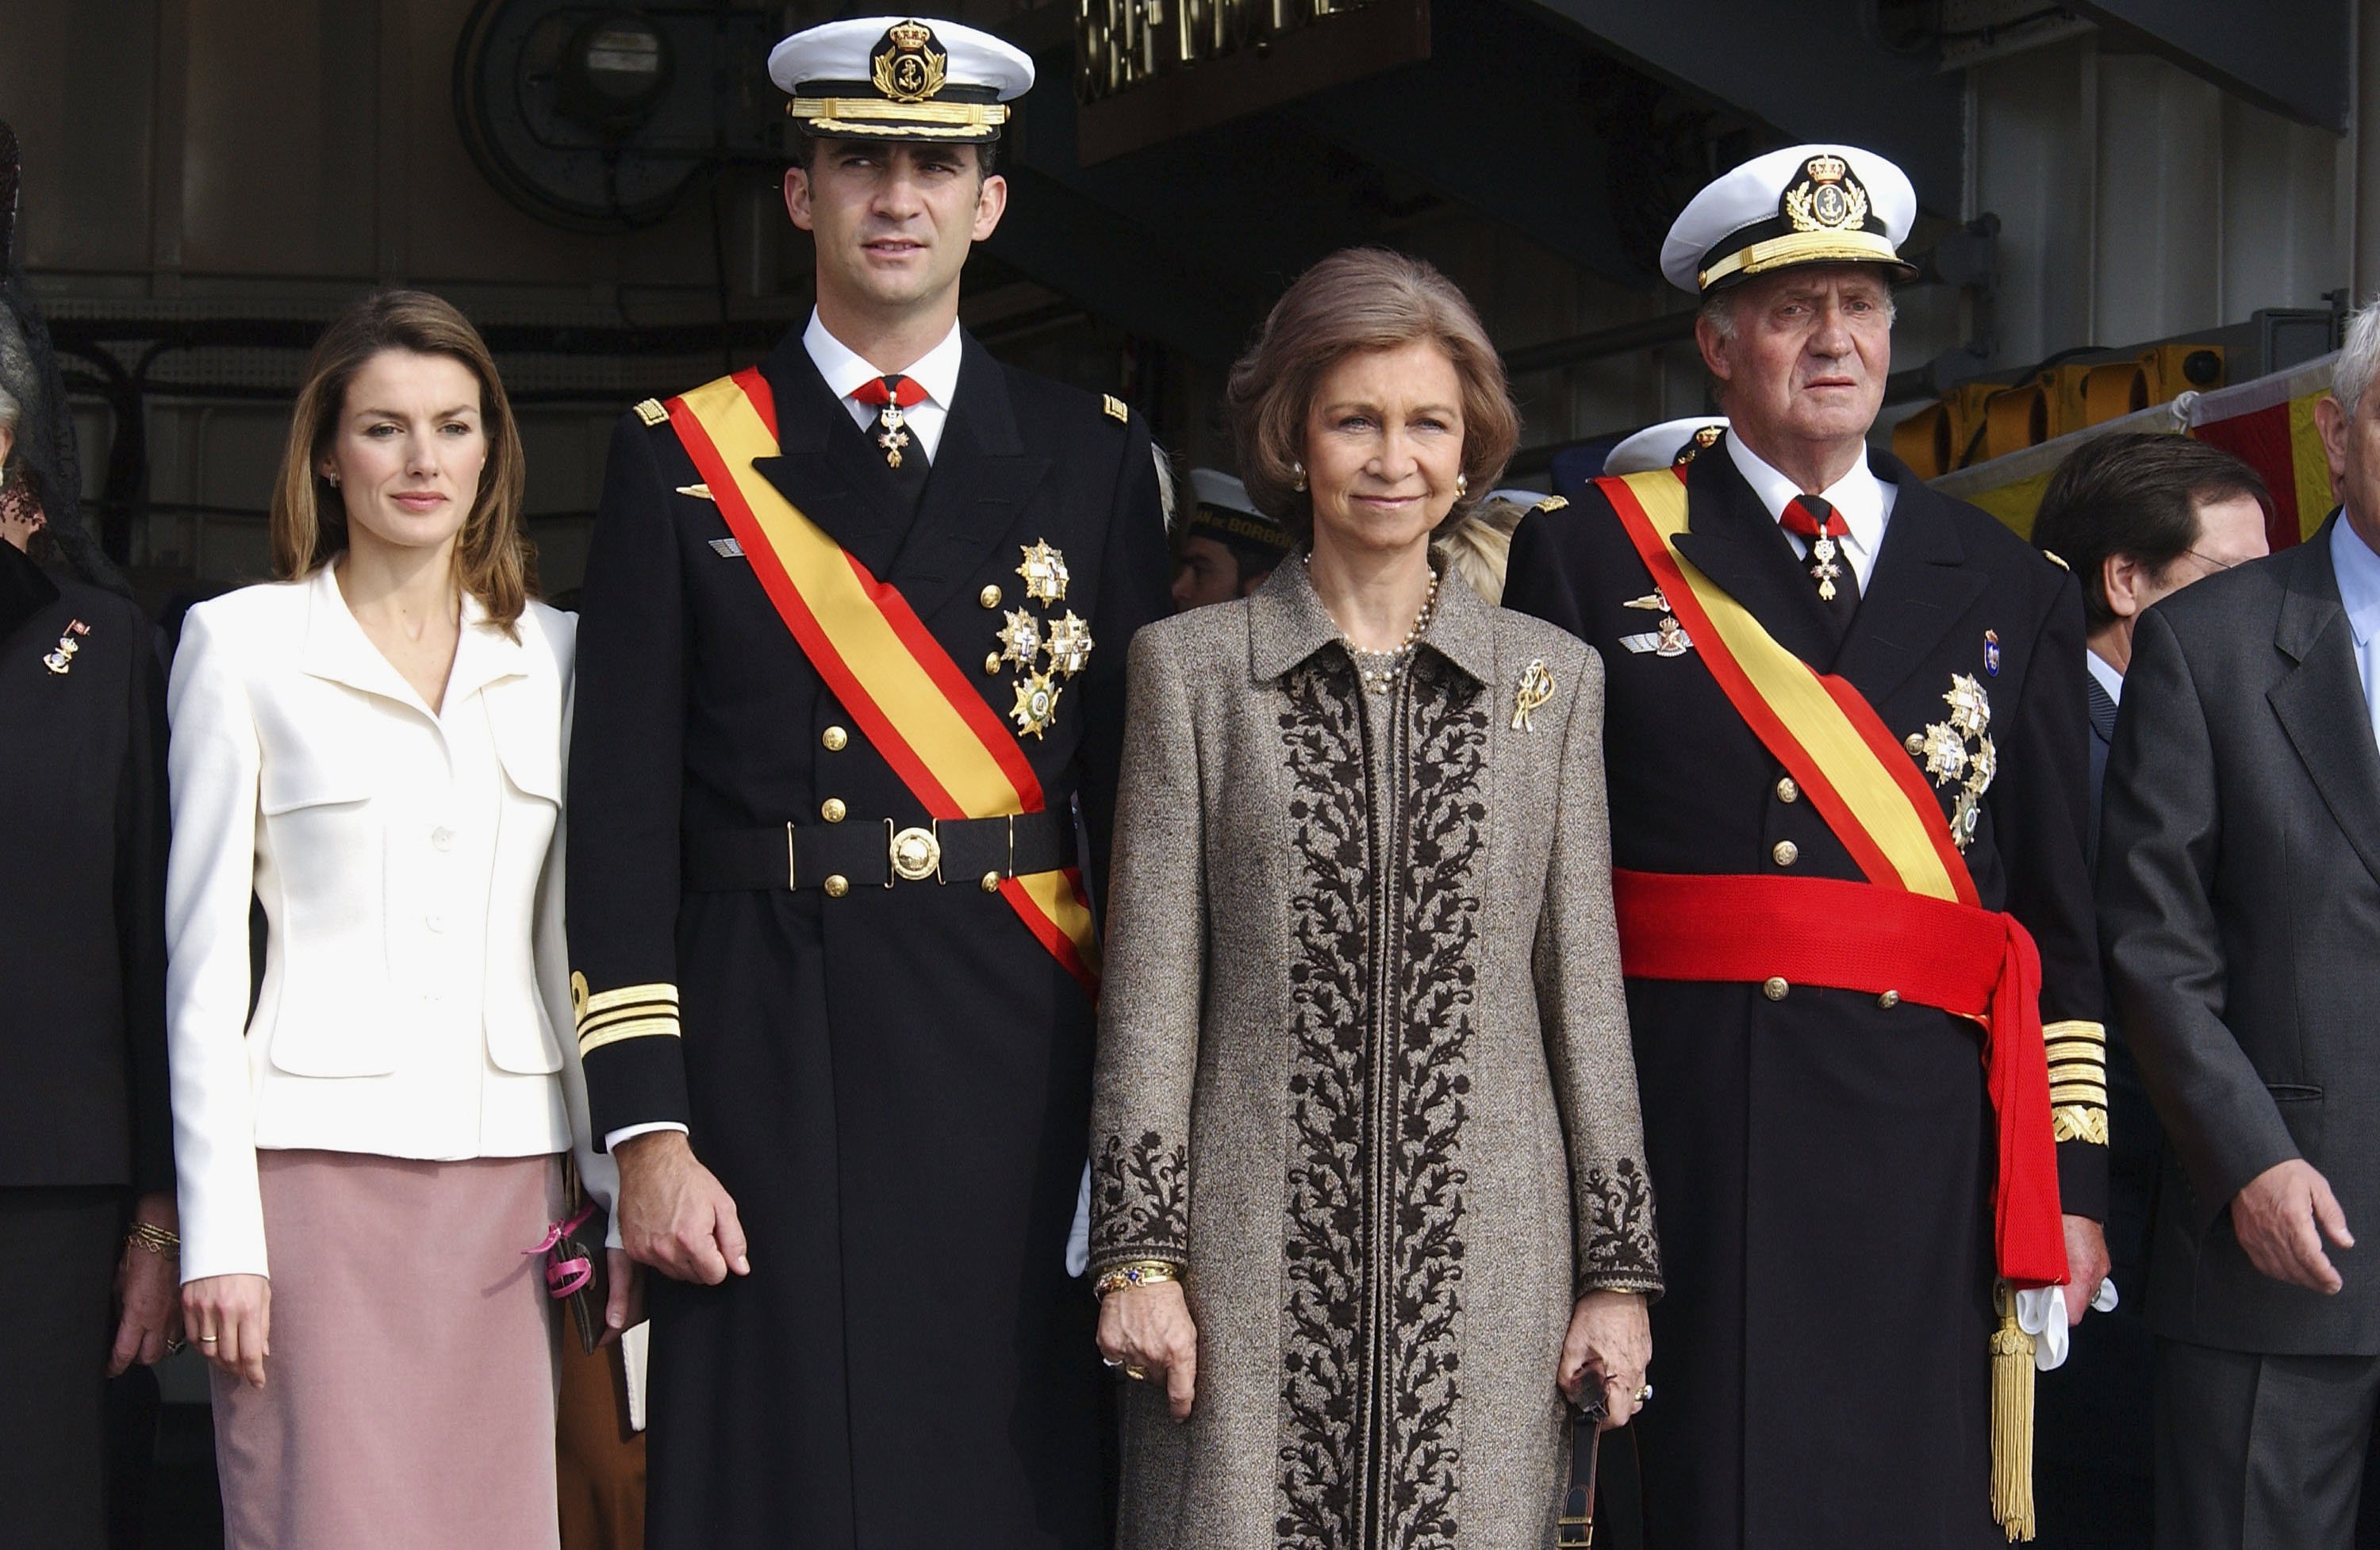 Princess Letizia, Crown Prince Felipe, Queen Sofia and King Juan Carlos attending the presentation of the Combat Flag to the Juan de Borbon Military Navy in Barcelona Harbour on November 7, 2004 in Barcelona, Spain. / Source: Getty Images